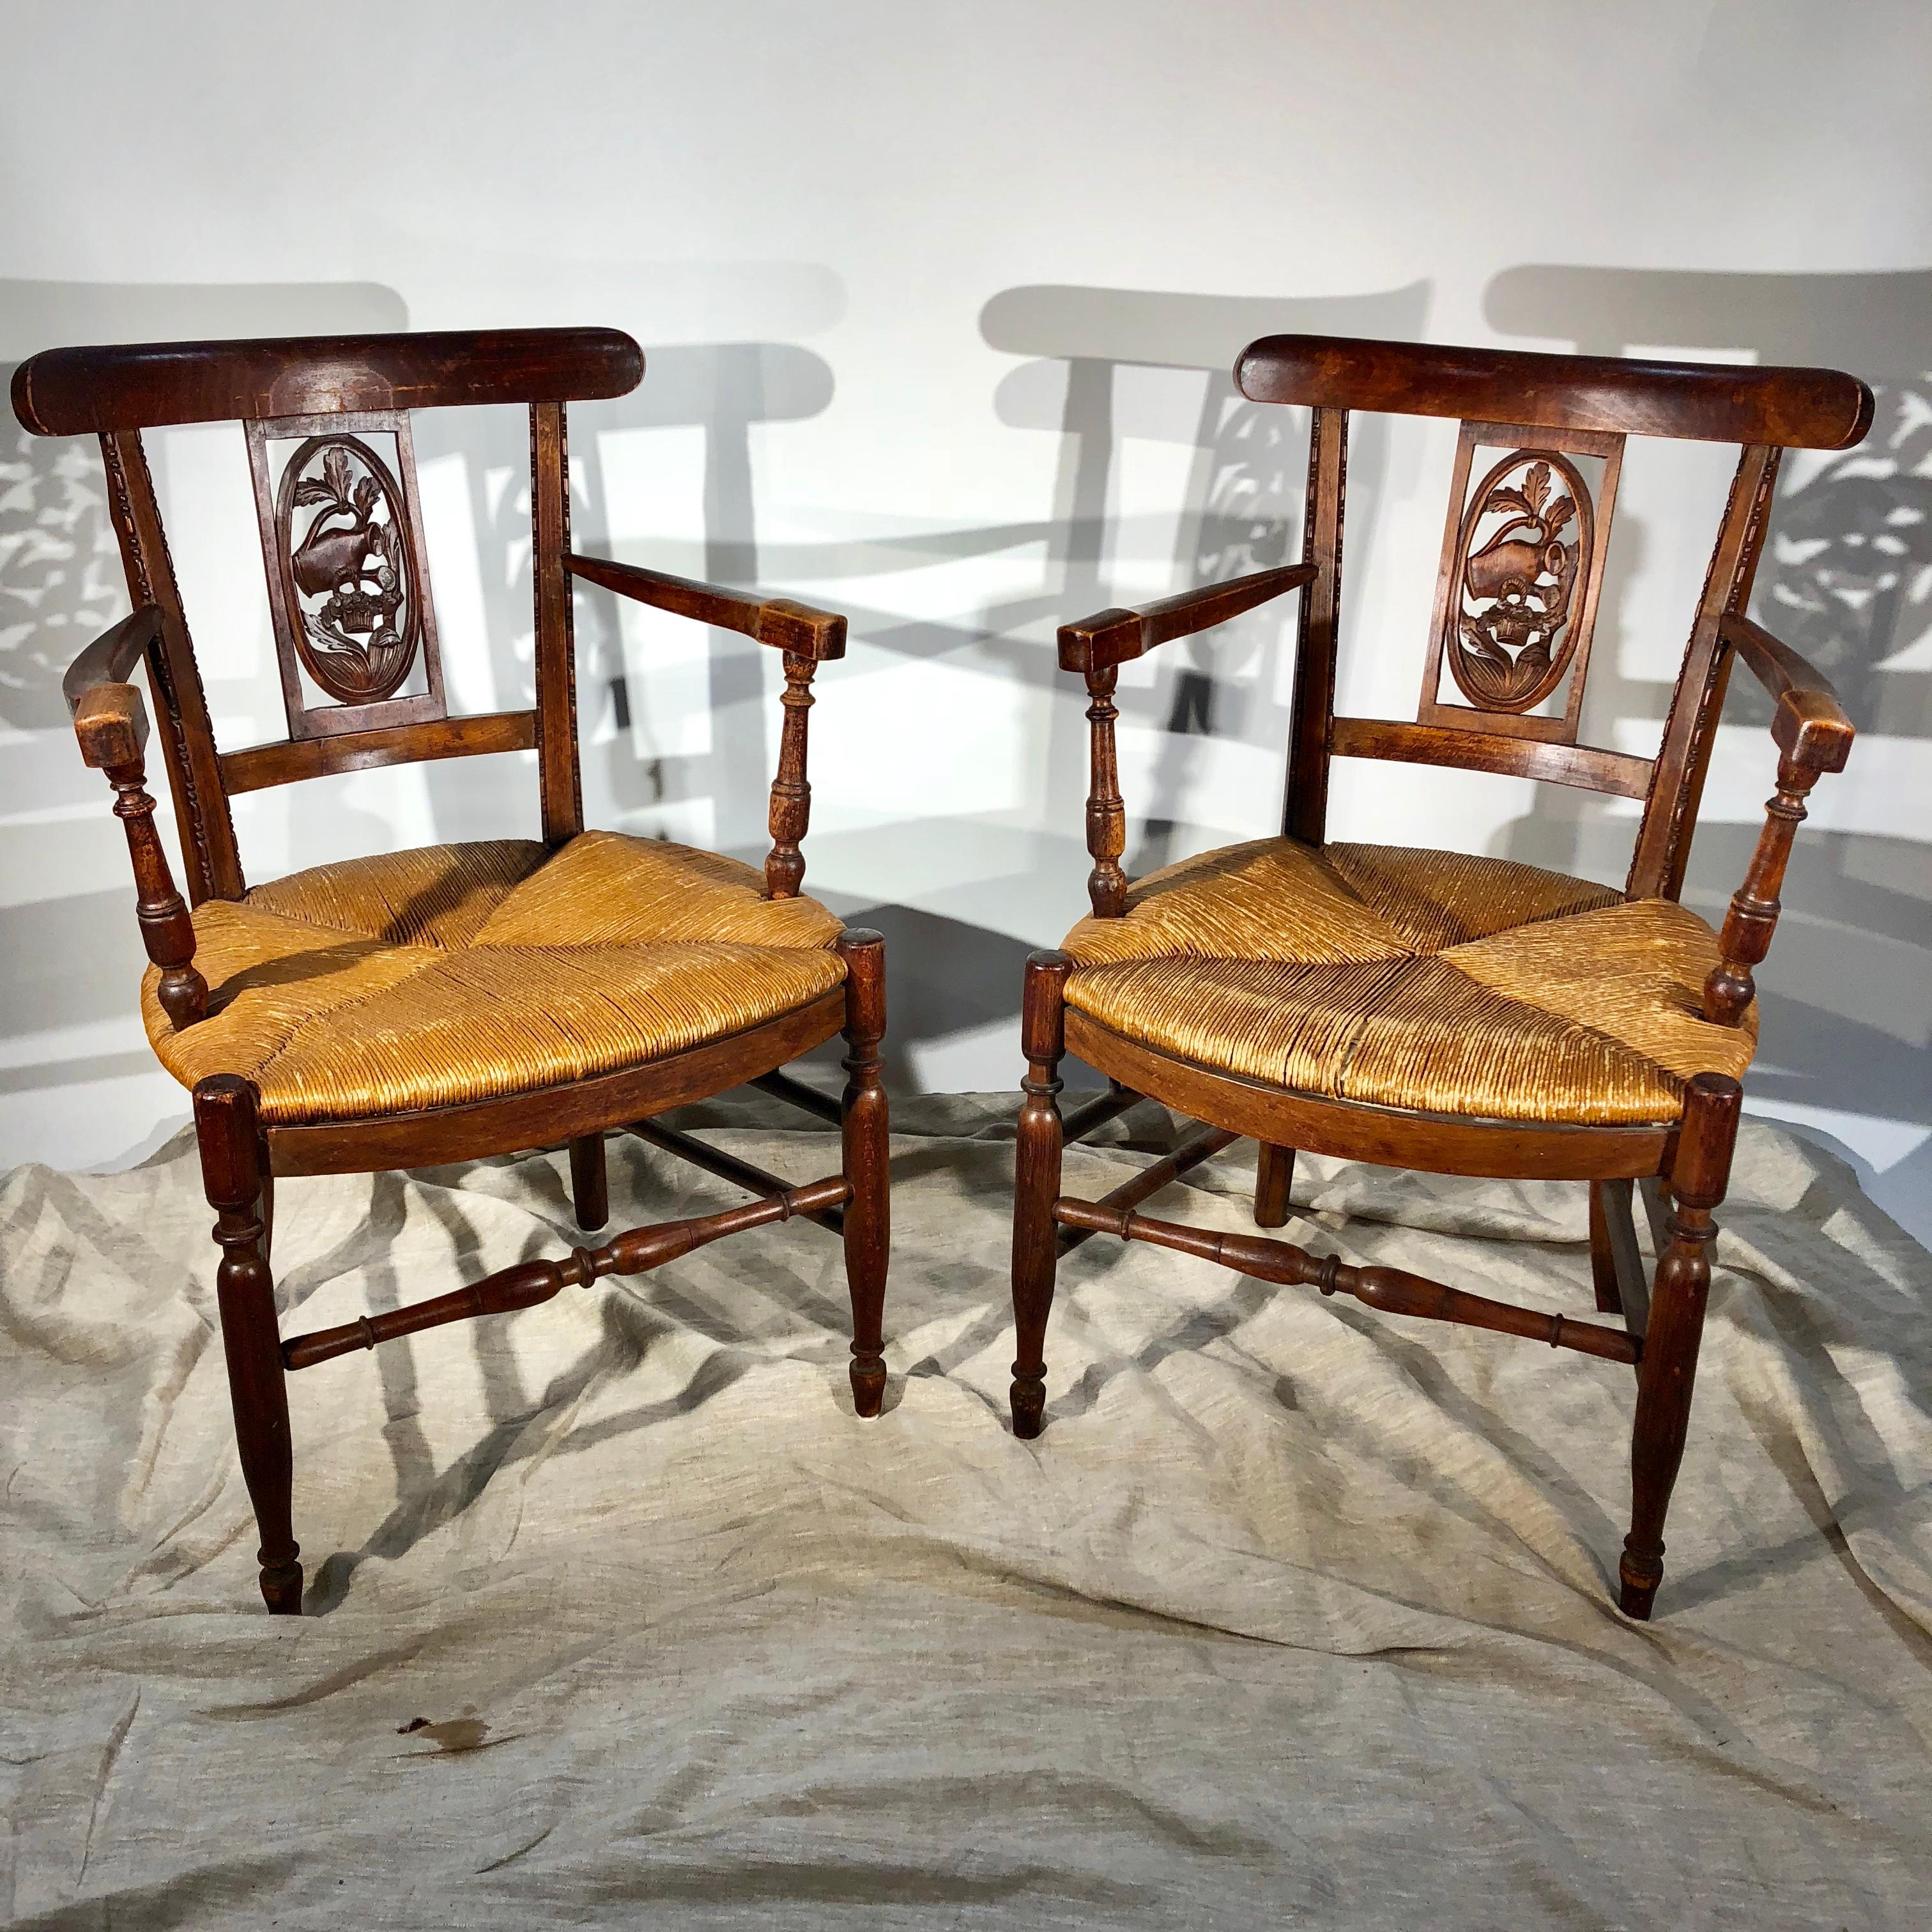 Pair of French Country Armchairs, Garden Theme, 19th Century 6